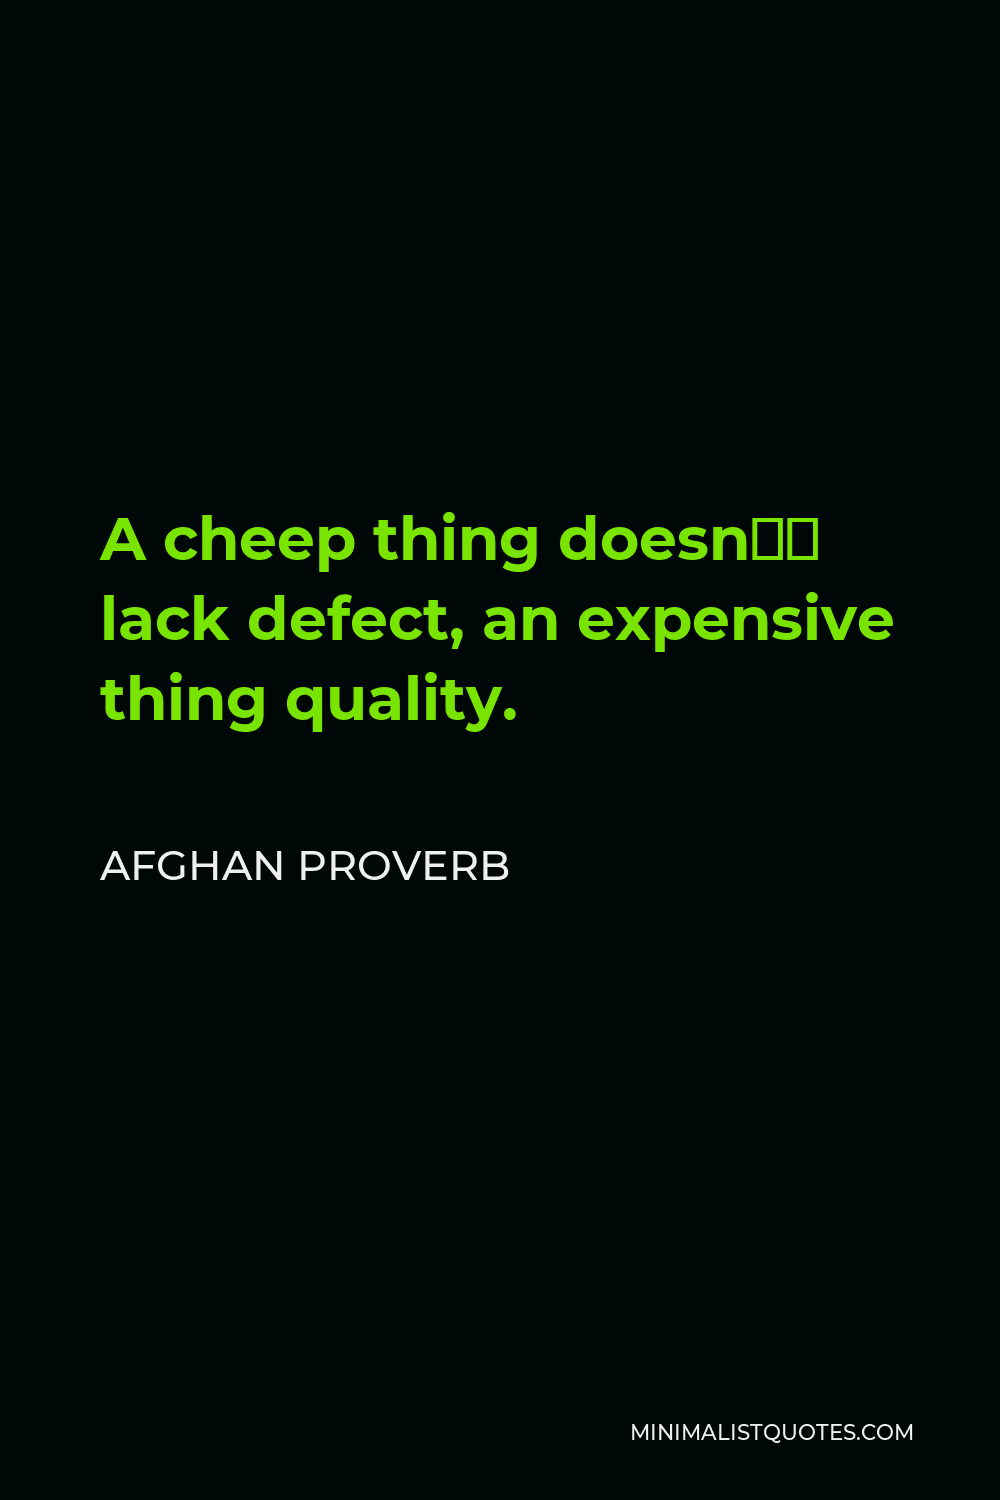 Afghan Proverb Quote - A cheep thing doesn’t lack defect, an expensive thing quality.